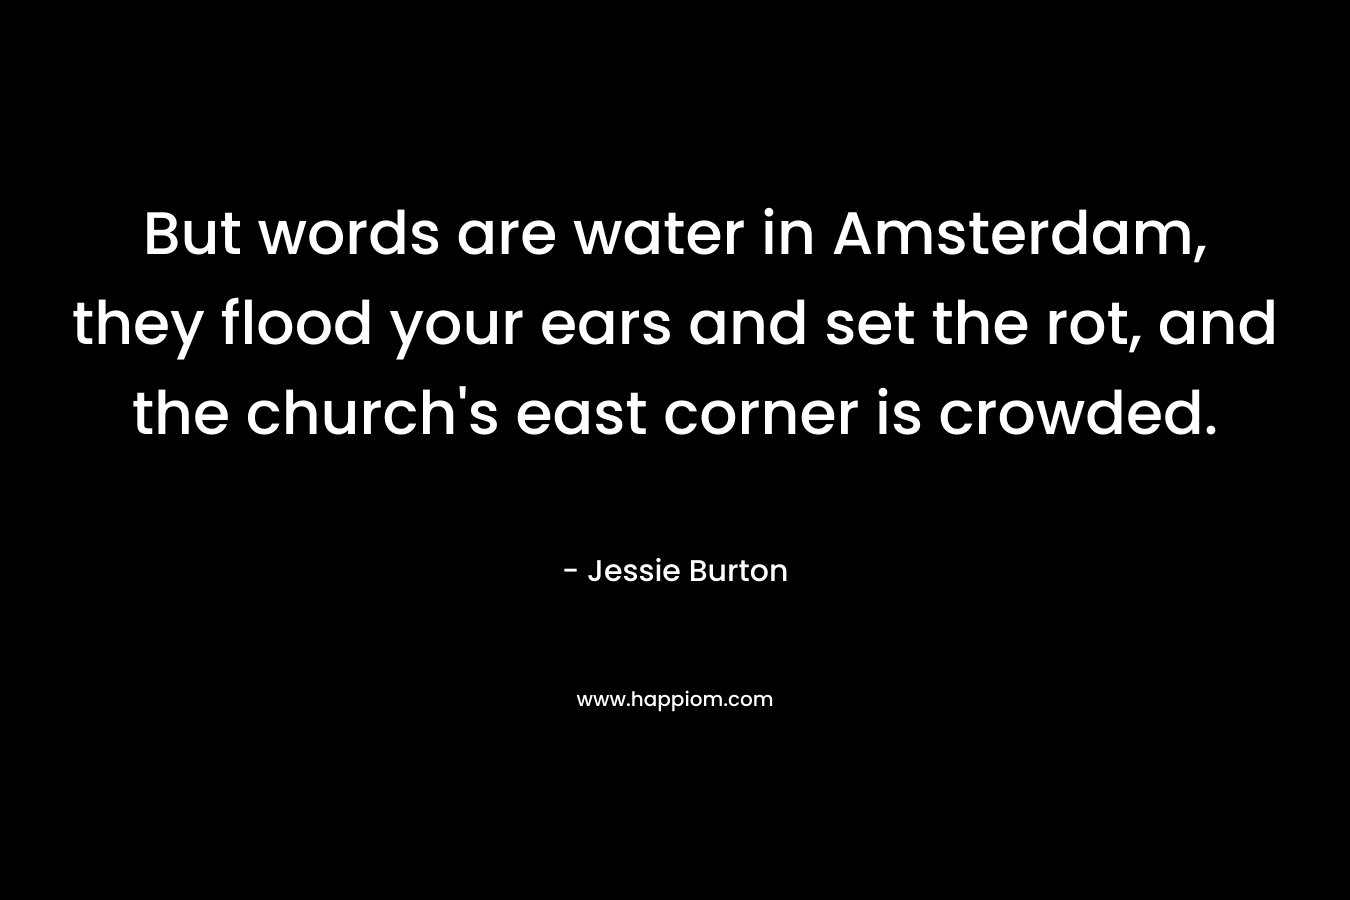 But words are water in Amsterdam, they flood your ears and set the rot, and the church's east corner is crowded.